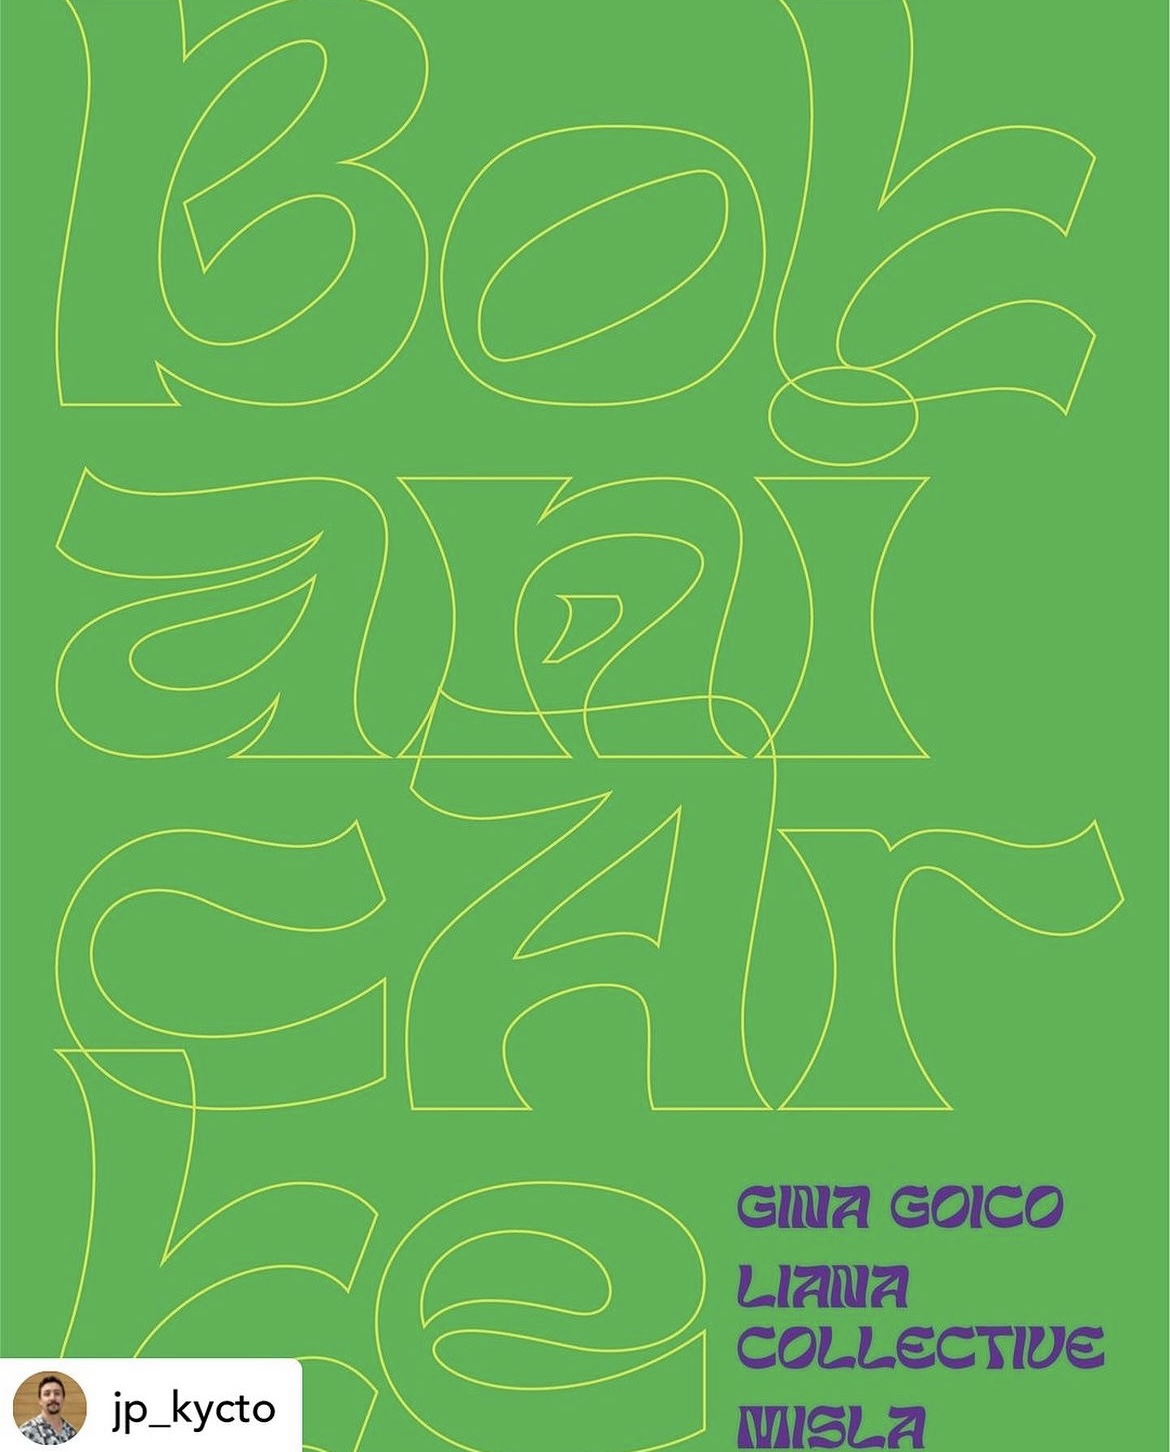 the word "Botanicárte" in white swirly letters on a green background, alongside the words "Gina Goico, Liana Collective, Misla"